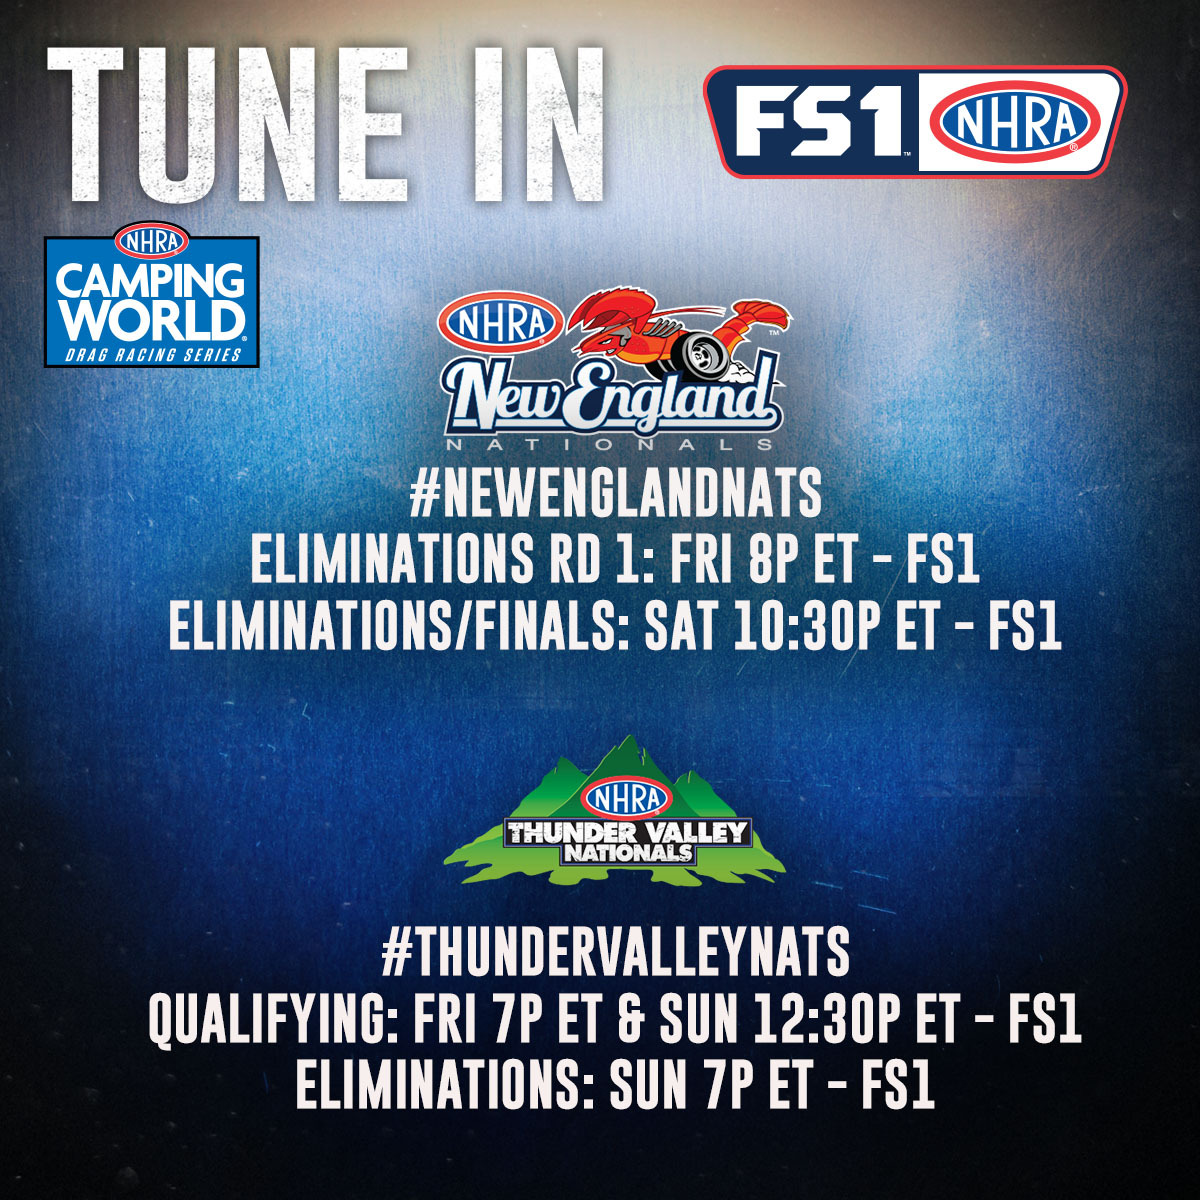 Everything you need to know for #NewEnglandNats eliminations and #ThunderValleyNats weekend coverage on FS1.